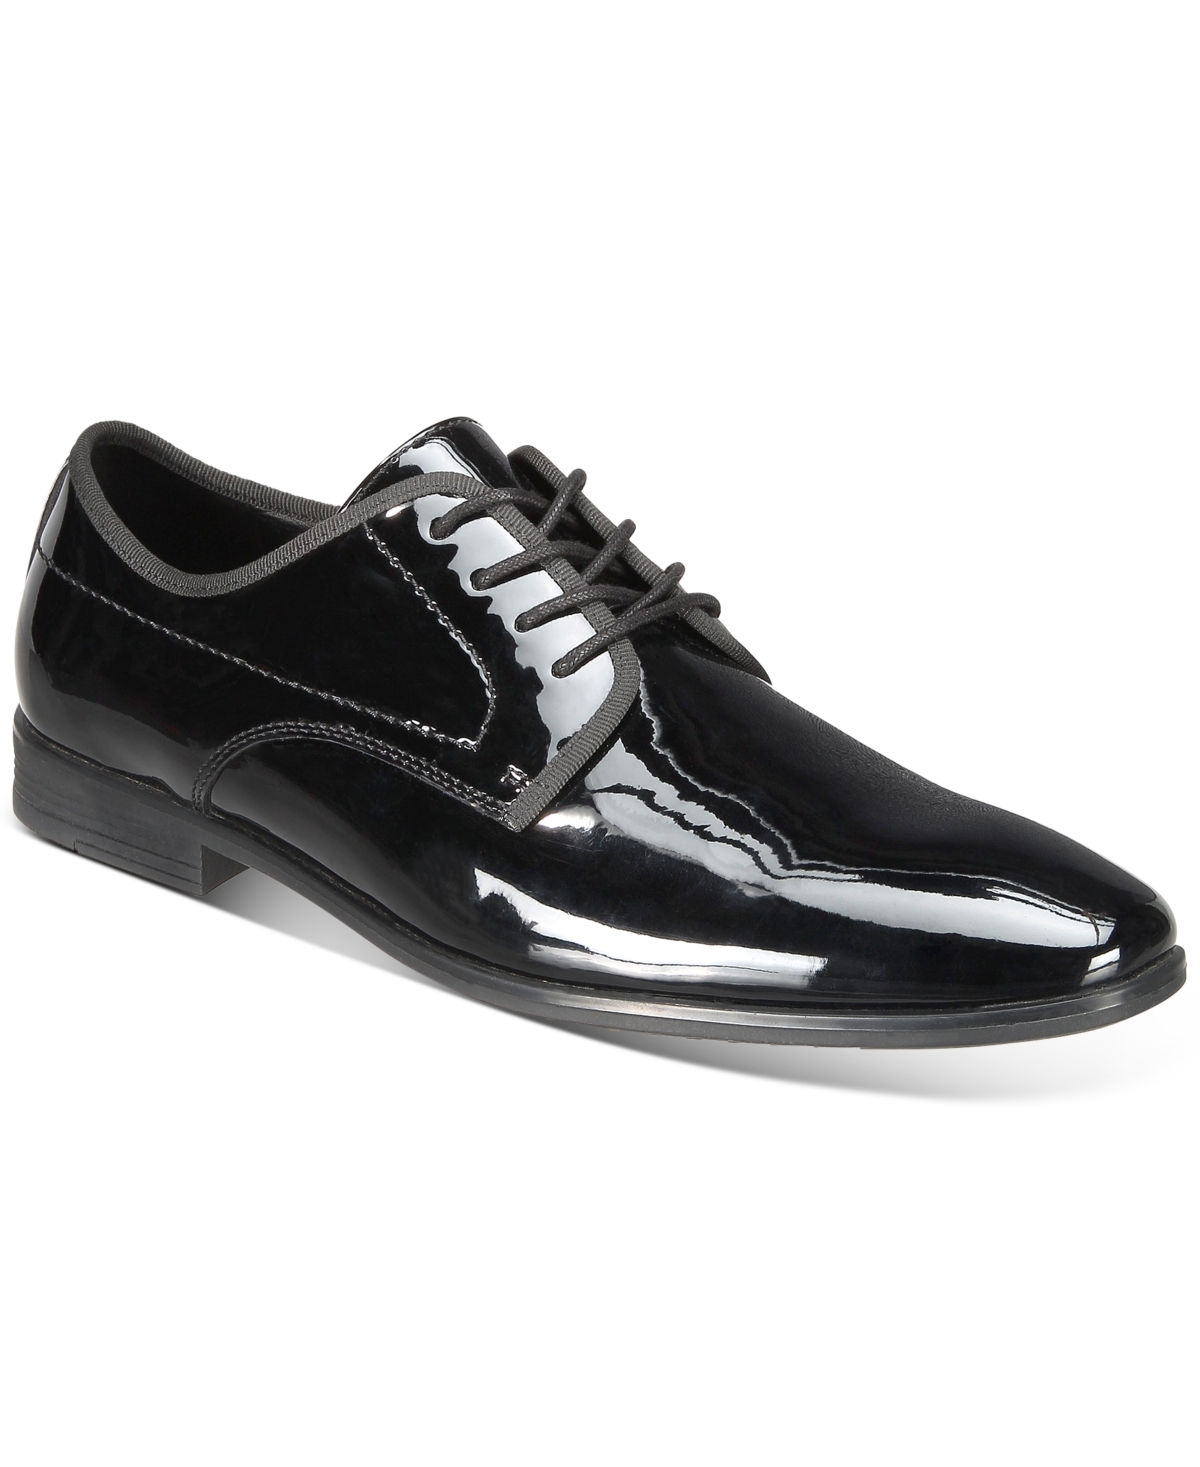 Men's Warner Patent Lace-Up Oxfords, Created for Macy's - Black